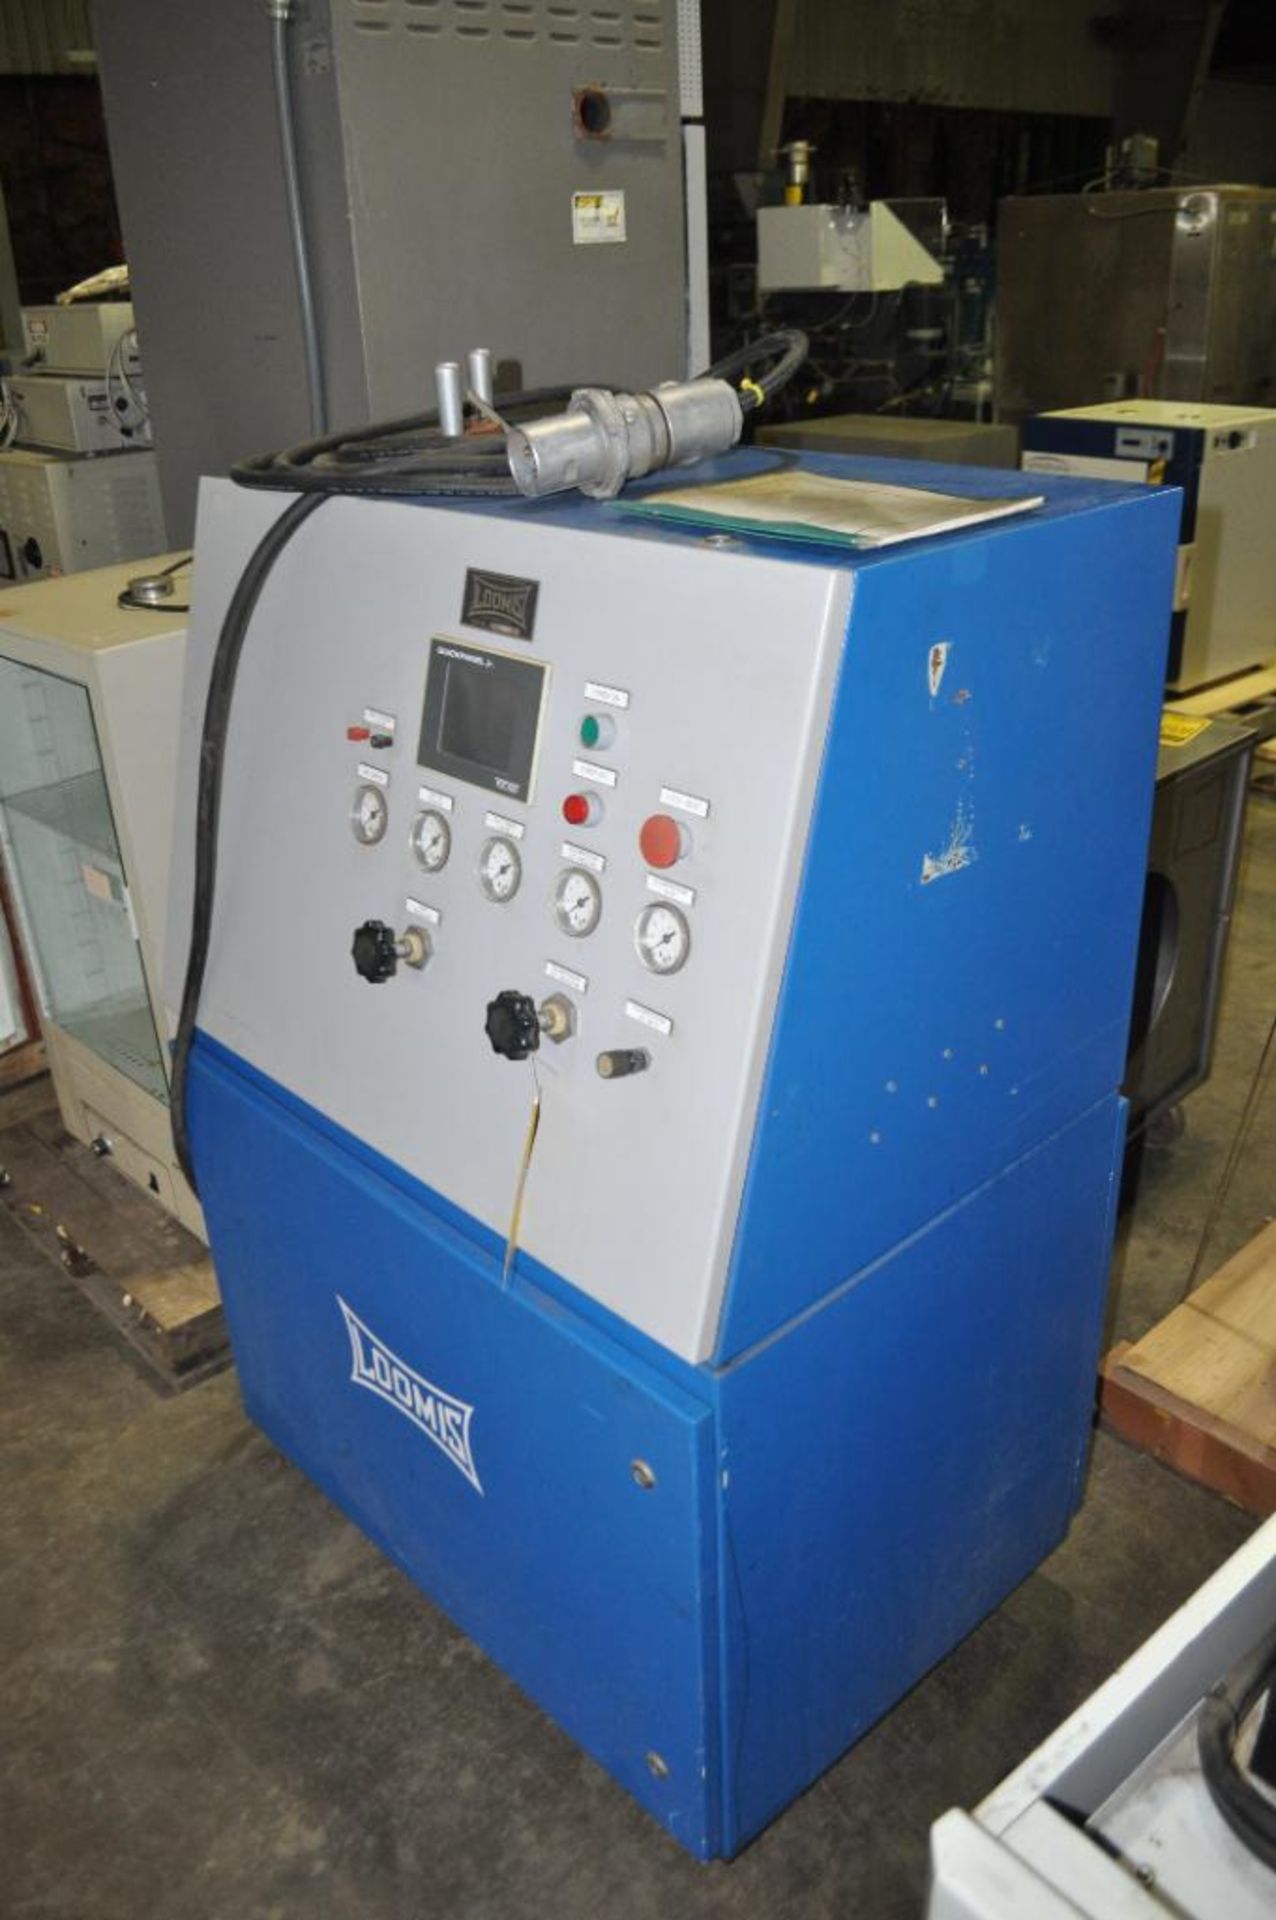 LOOMIS ISO-STATIC MOLDER PRESS, 45,000 PSI, 86 CUBIC INCH CAPACITY - Image 4 of 4